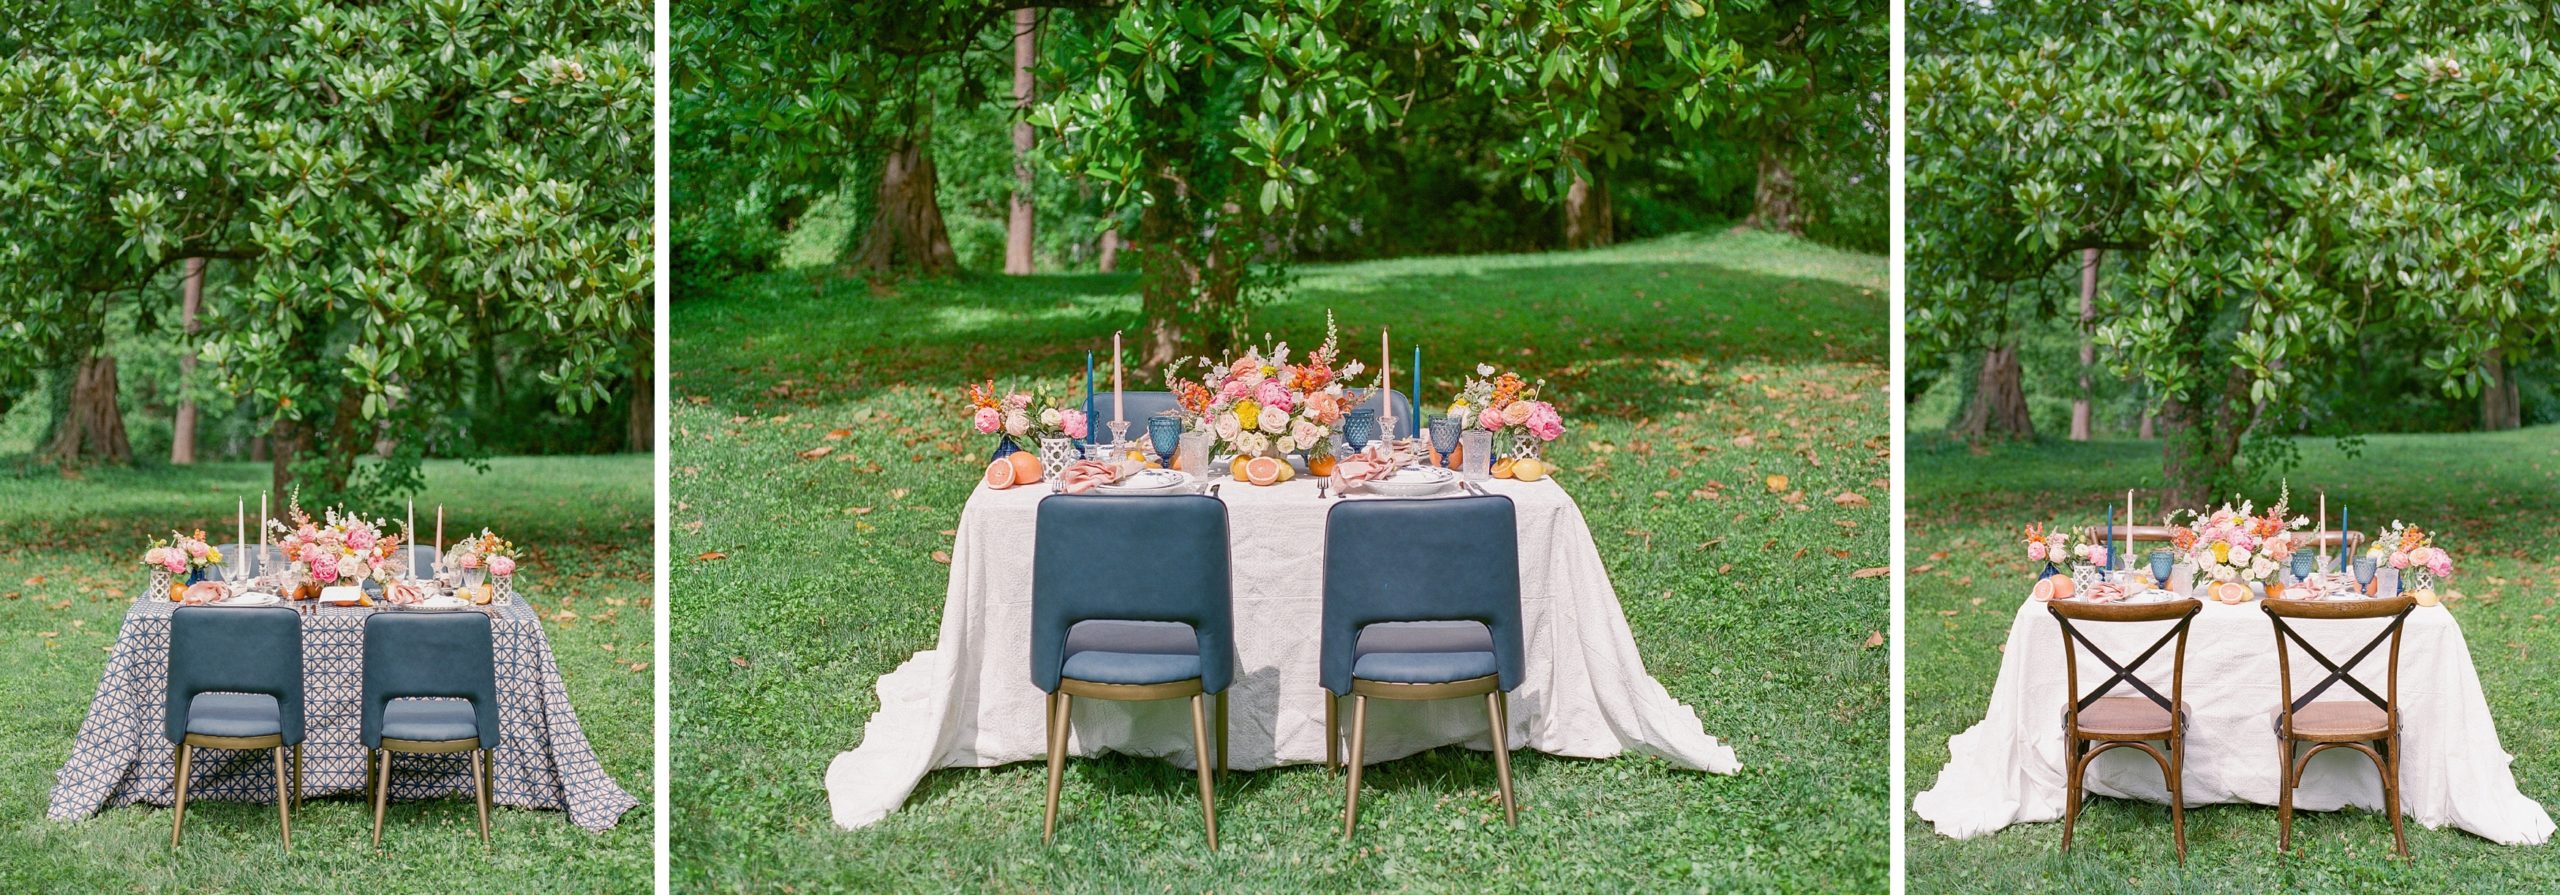 This citrus inspired wedding decor was photographed on film by Washington, DC wedding photographer, Alicia Lacey at a private residence.